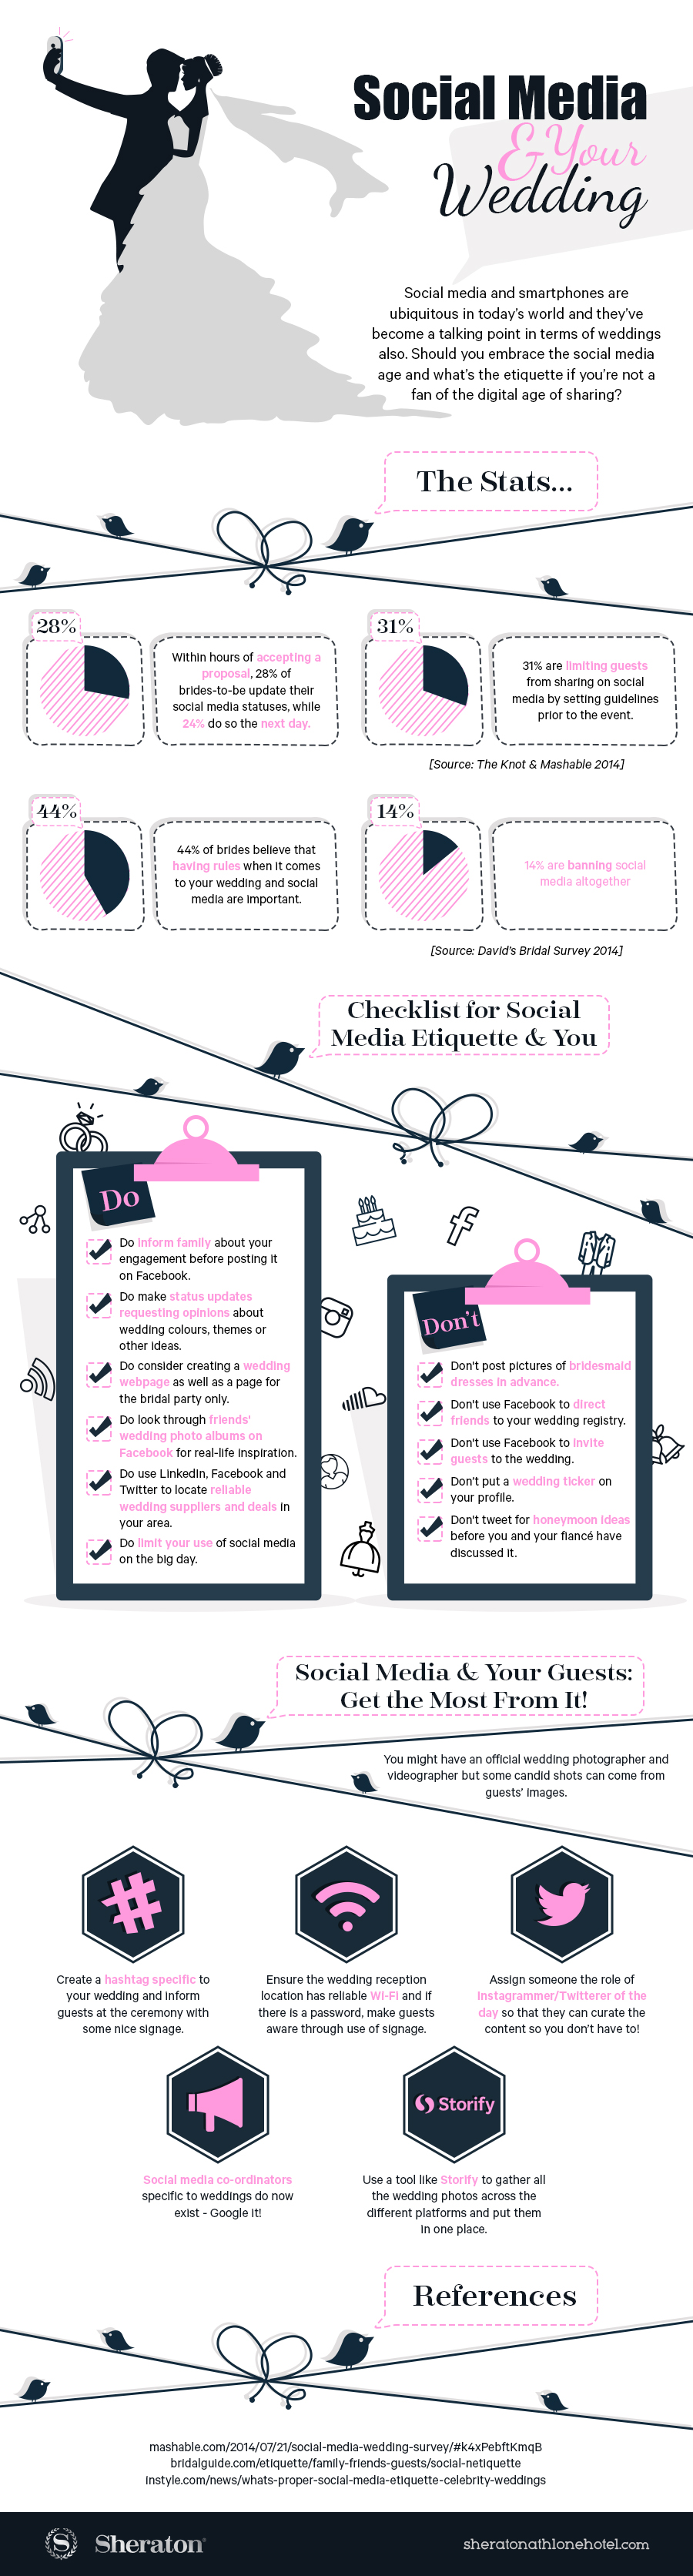 Social-Media-Etiquette-and-Weddings-infographic